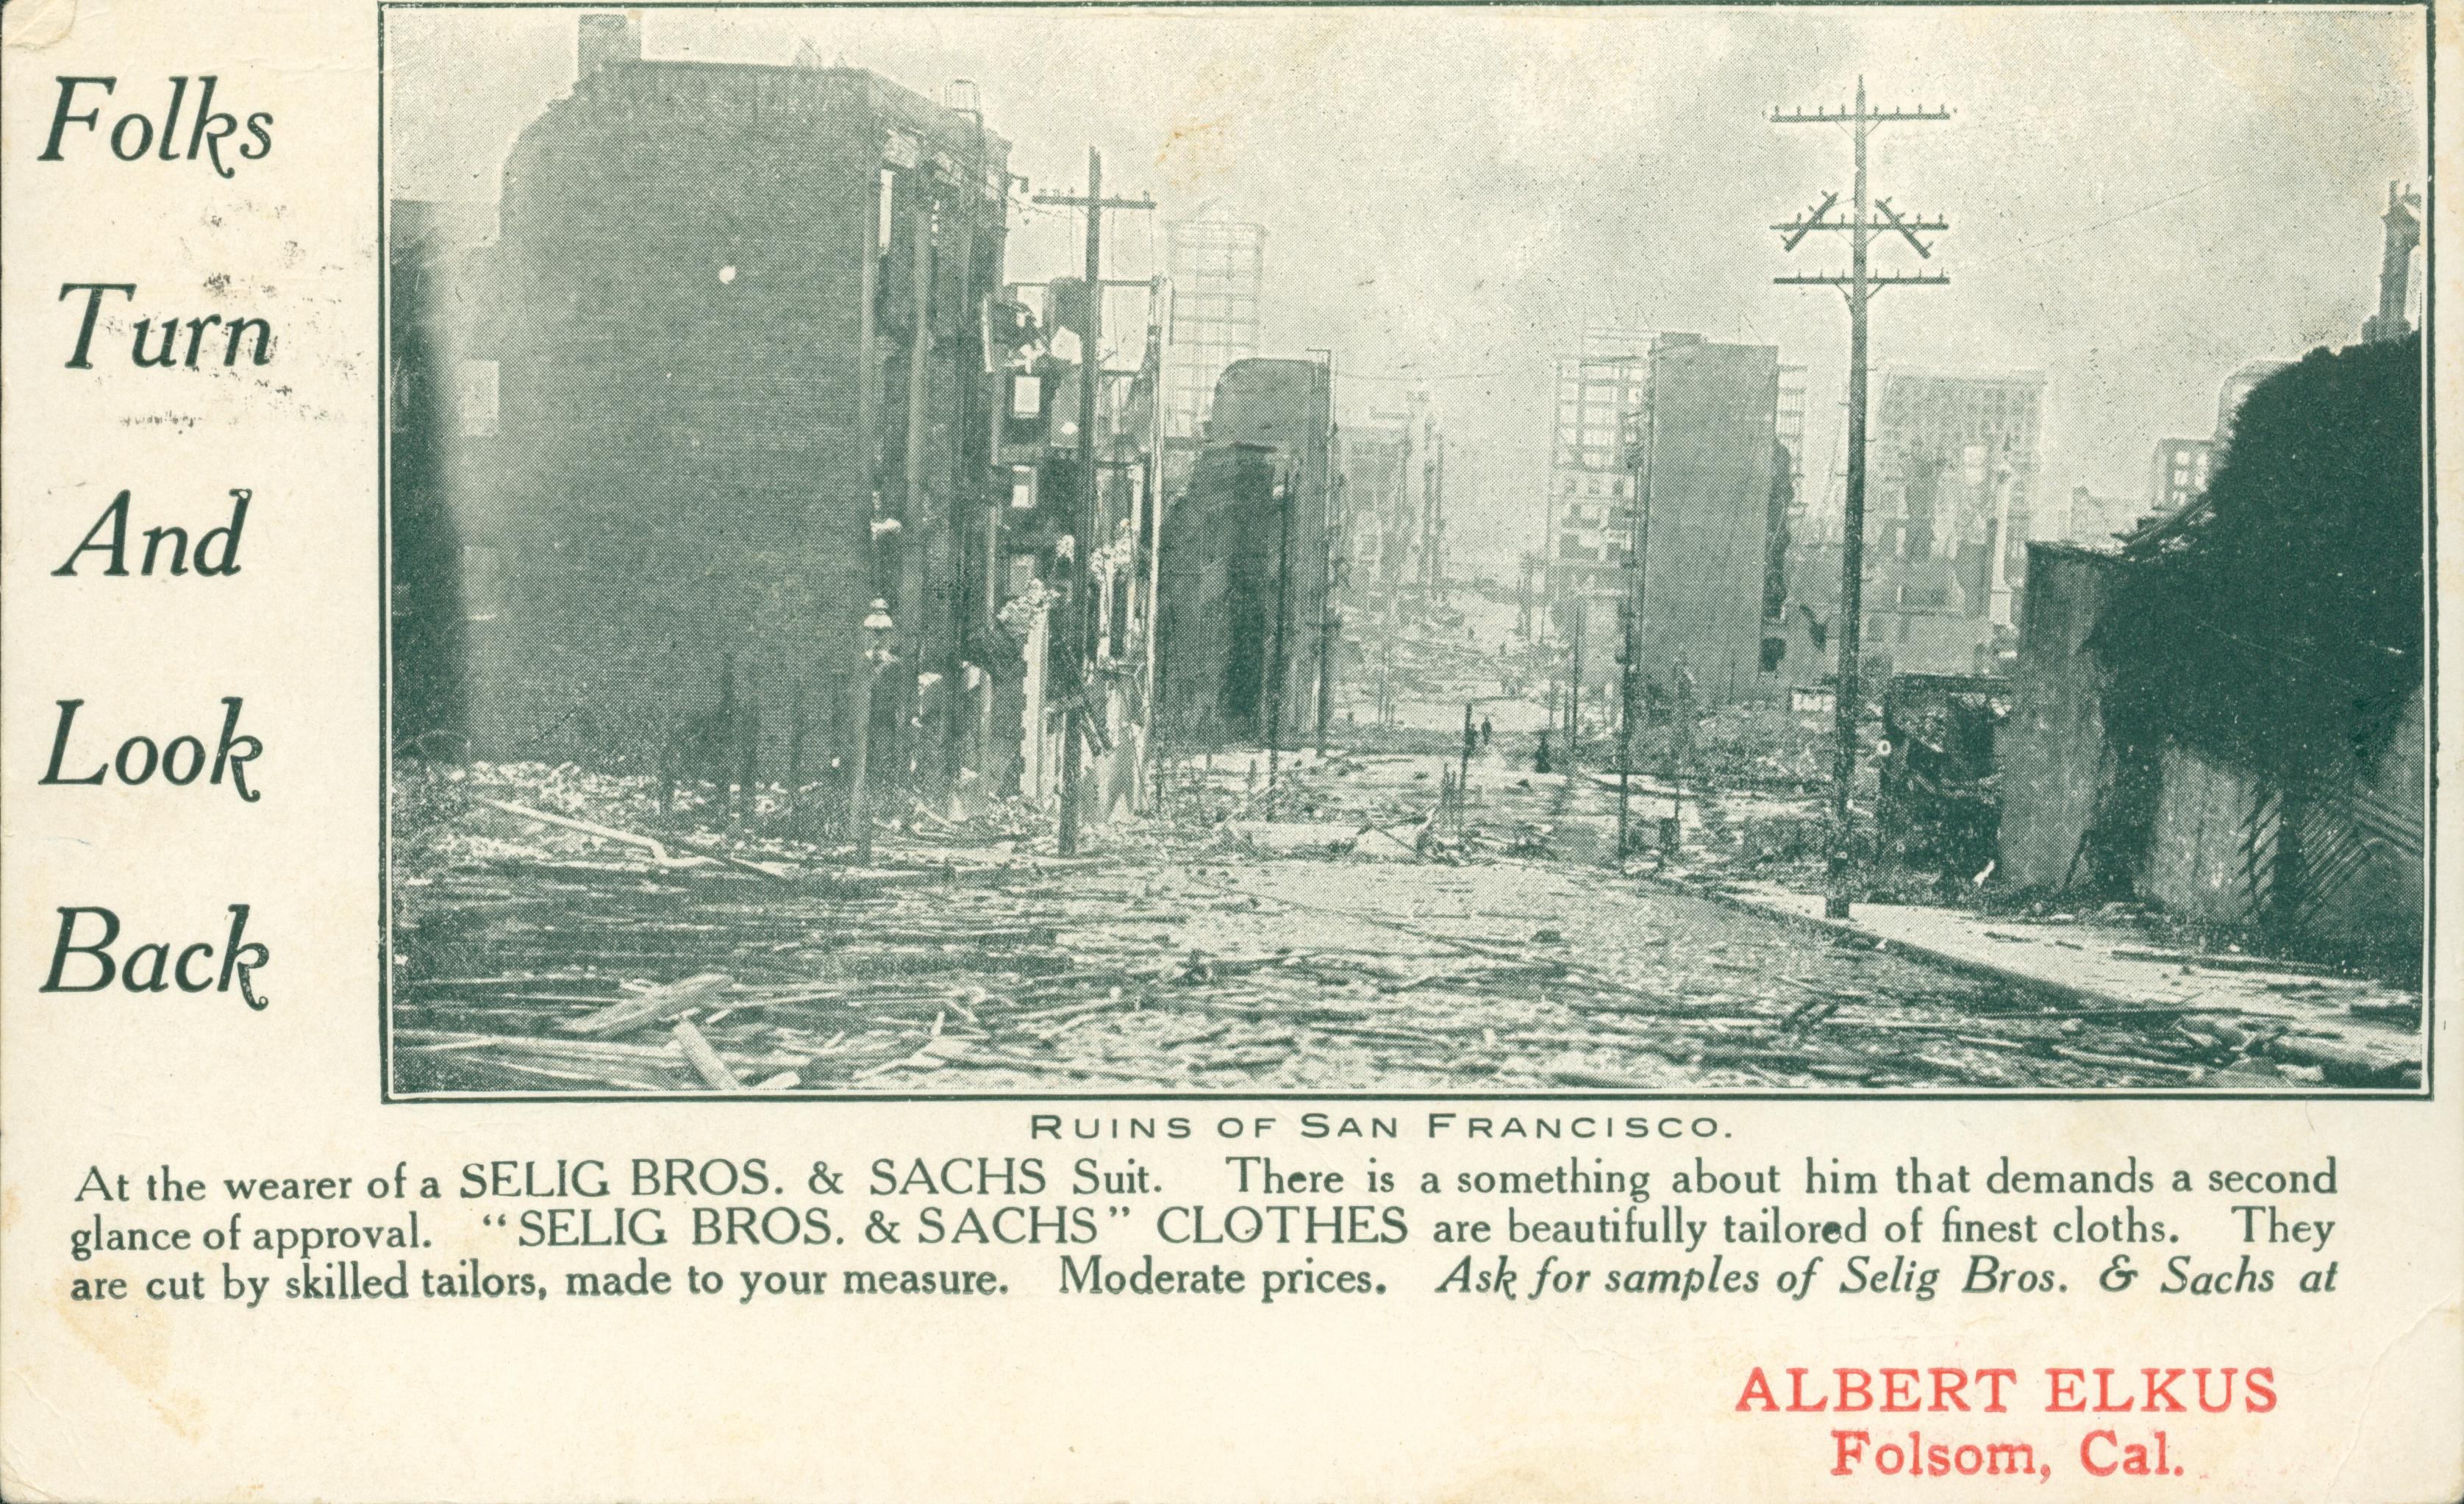 Shows the destruction of a street in San Francisco. Also an advertisement for clothes.